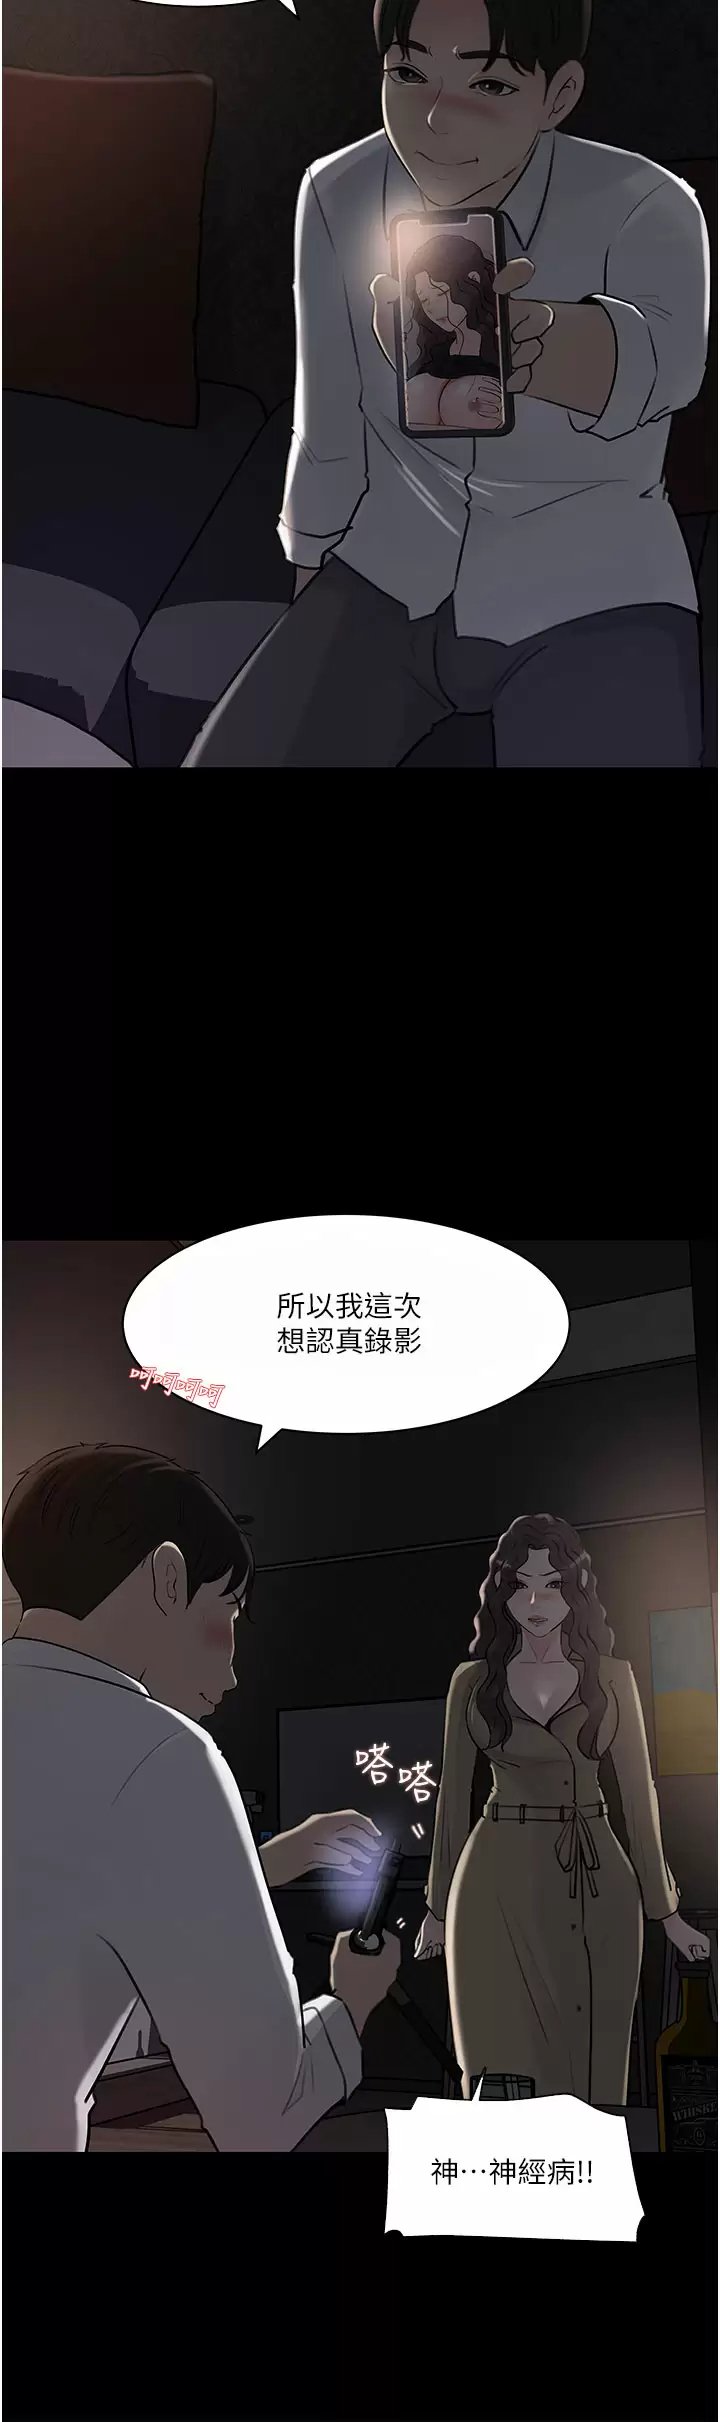 in-my-sister-in-law-raw-chap-32-38